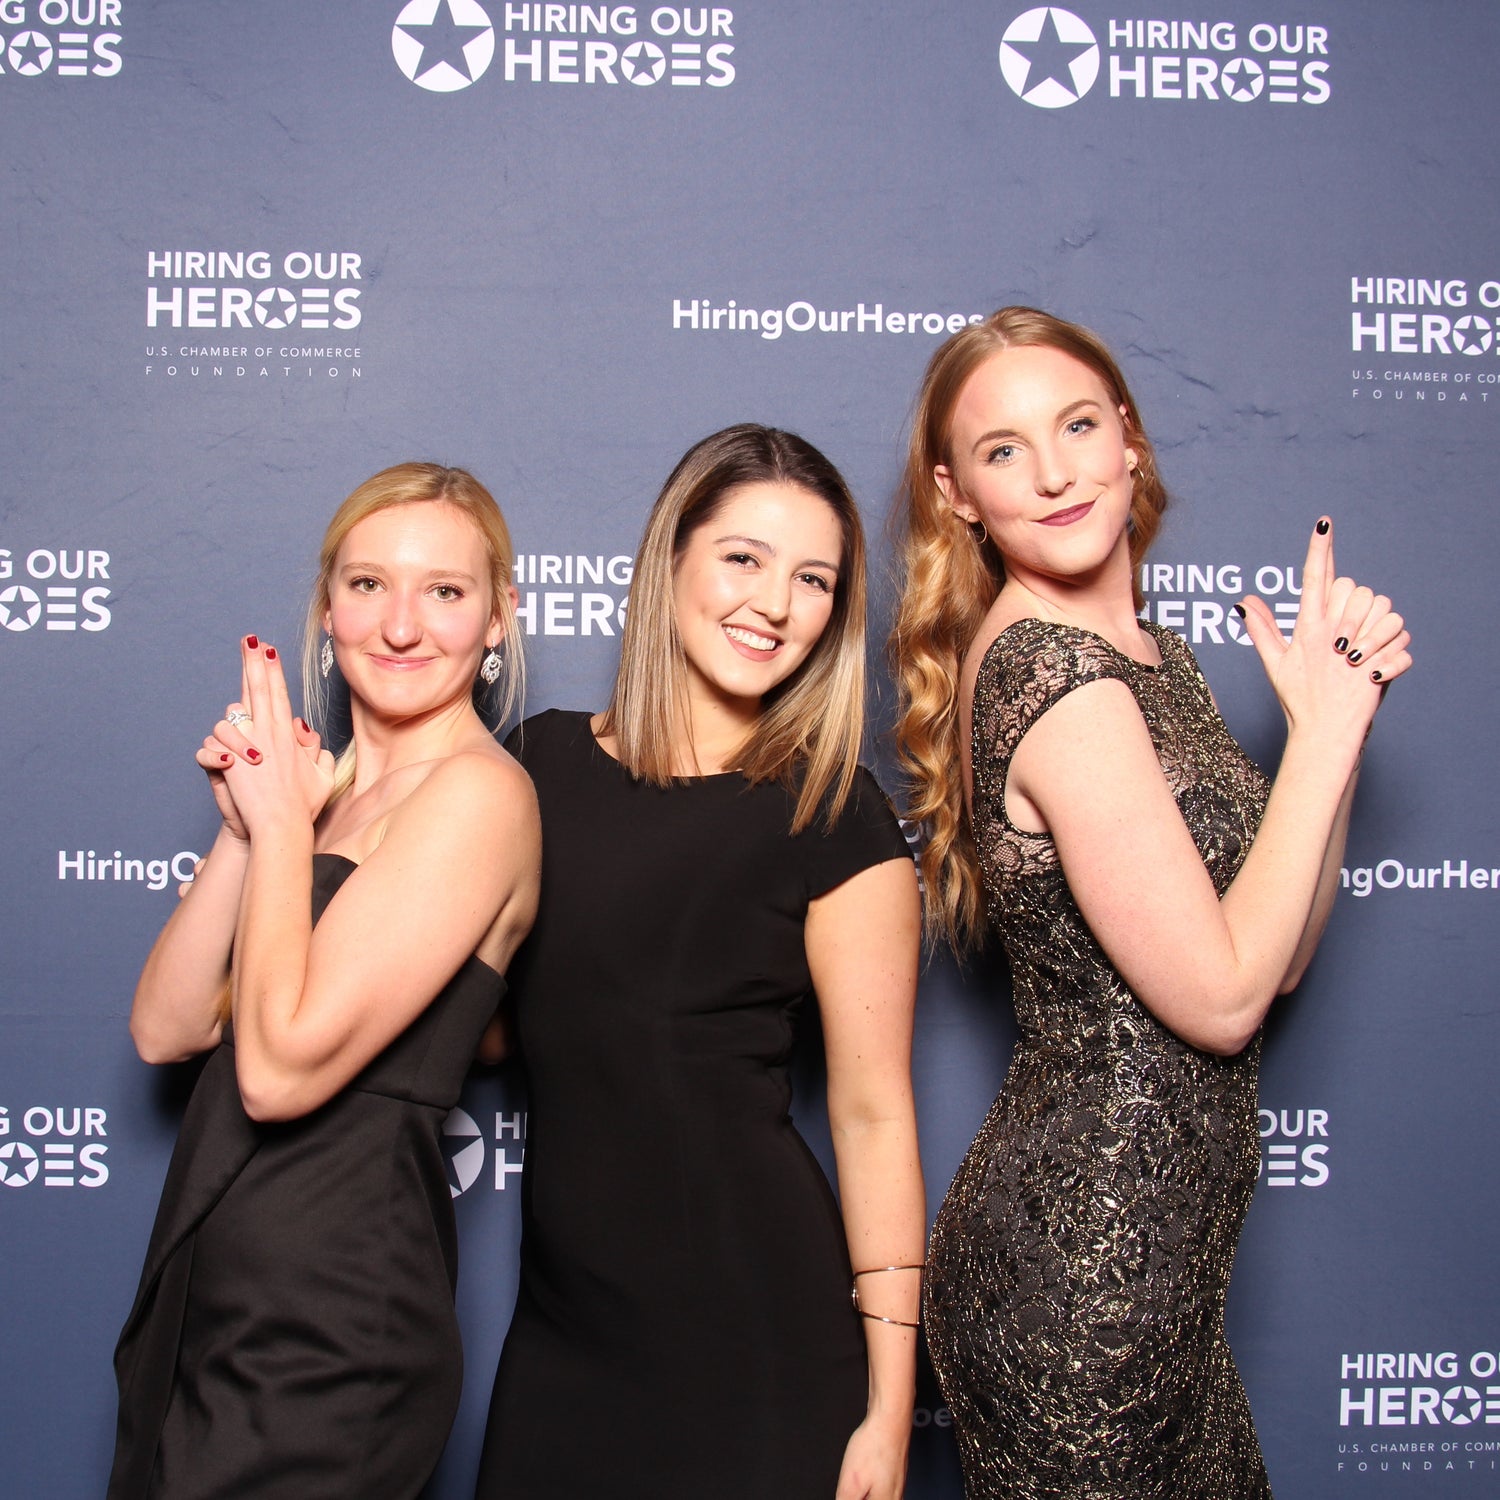 Three women posing in front of a step and repeat photo banner at a Hiring Our Heroes event